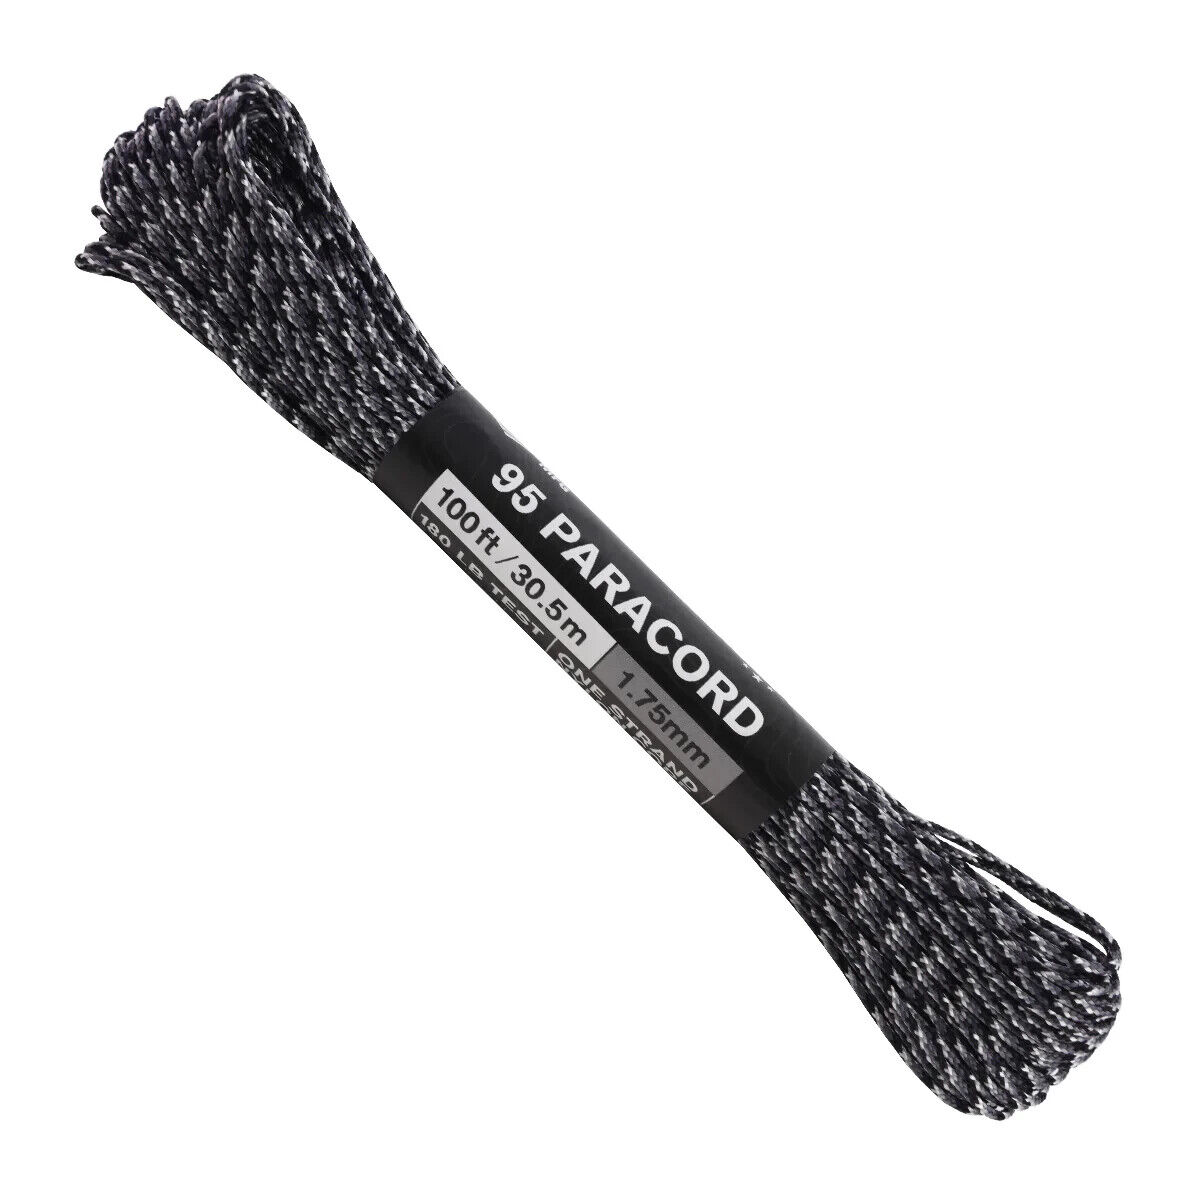 Atwood Rope 1322H 95 Paracord Urban Camo